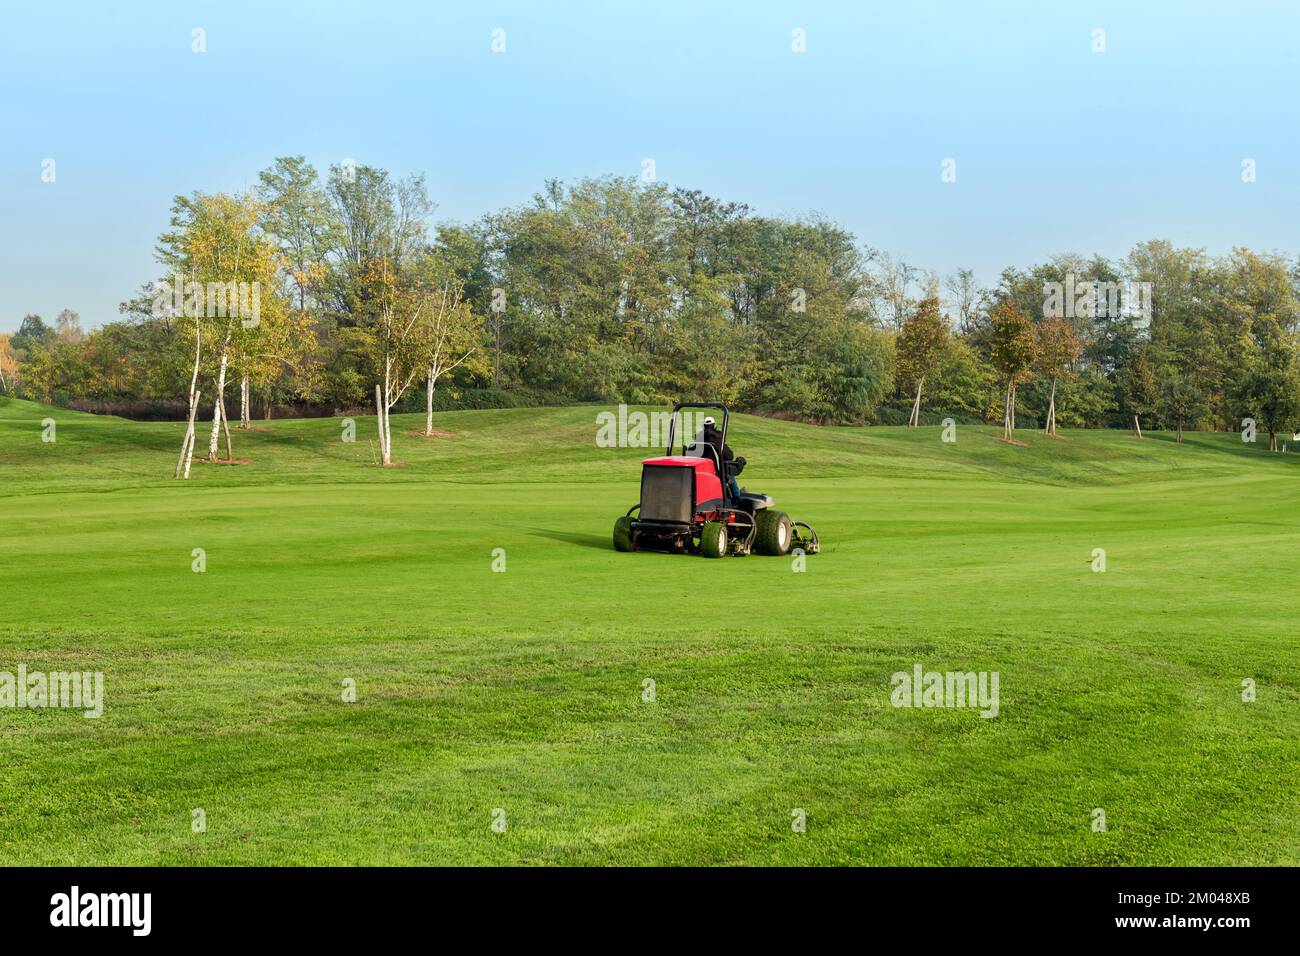 Employee driving lawn mower and cutting green grass during work on golf course on autumn day Stock Photo